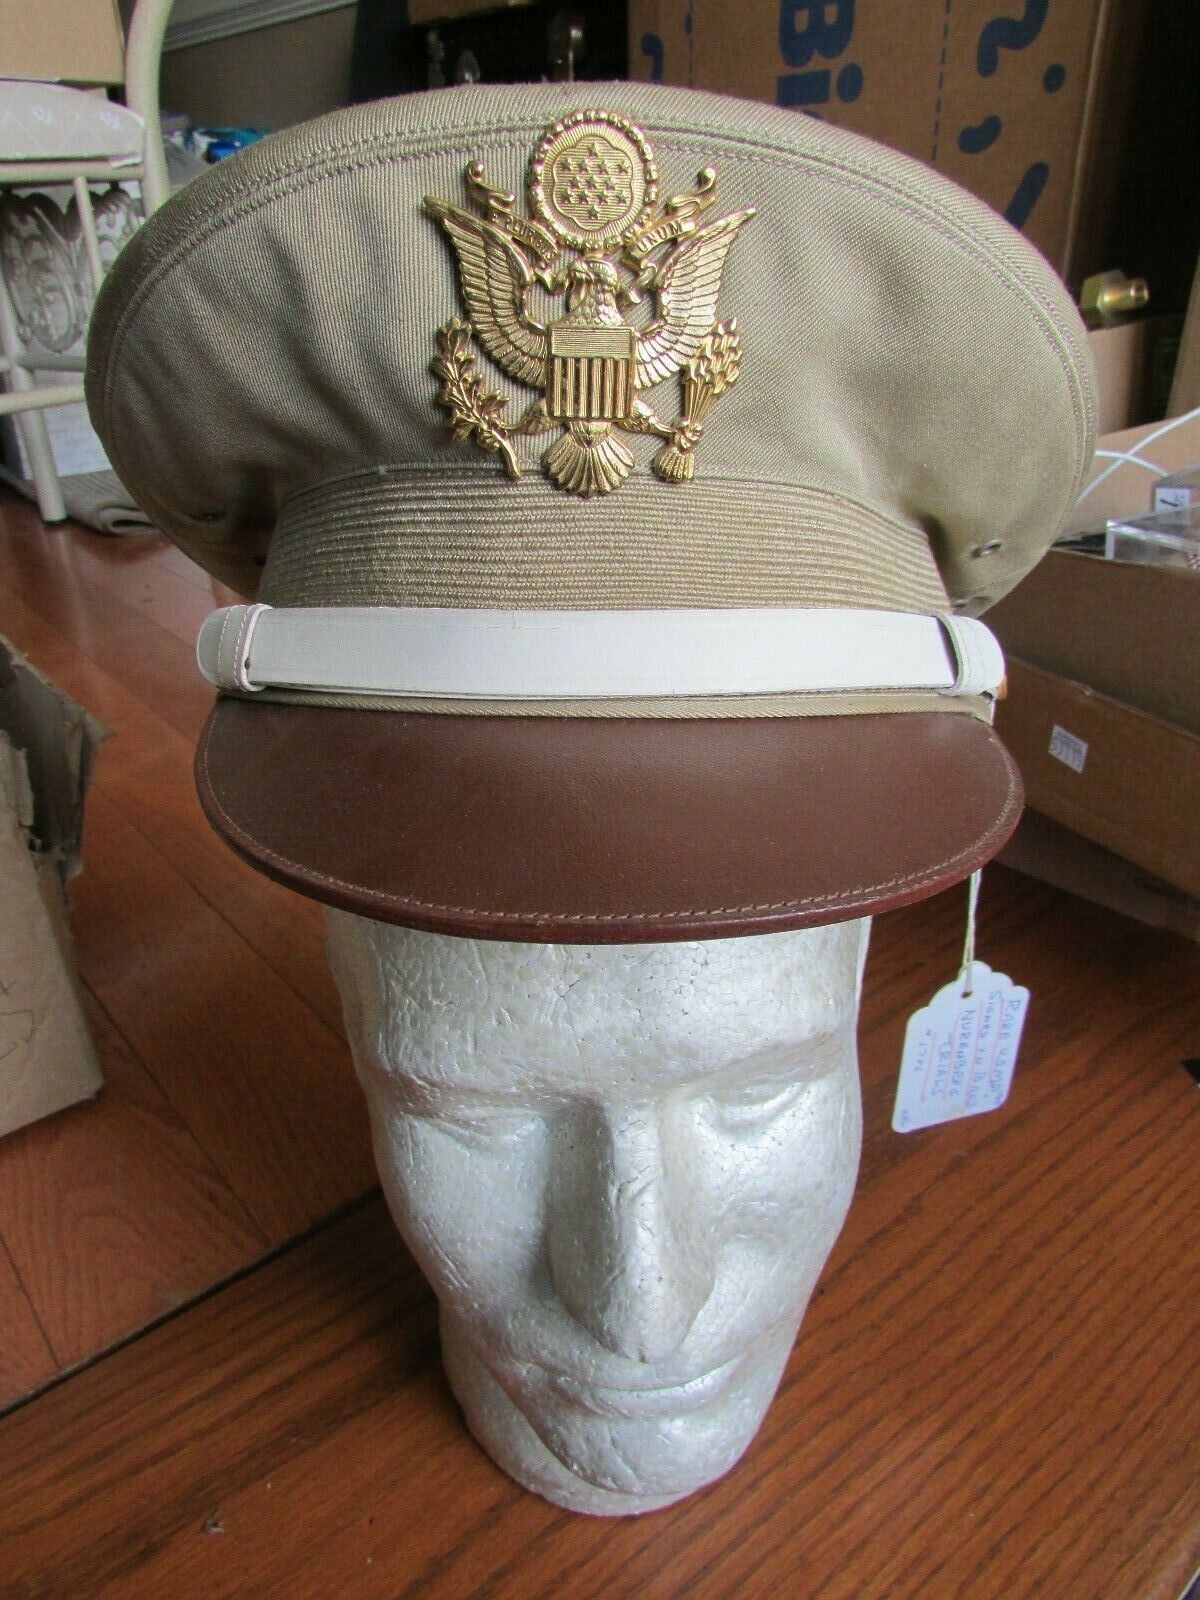 RAREST WW2 US Army MP Police Visor Hat -Exclusivaly made for NURNBERG TRIAL,1946